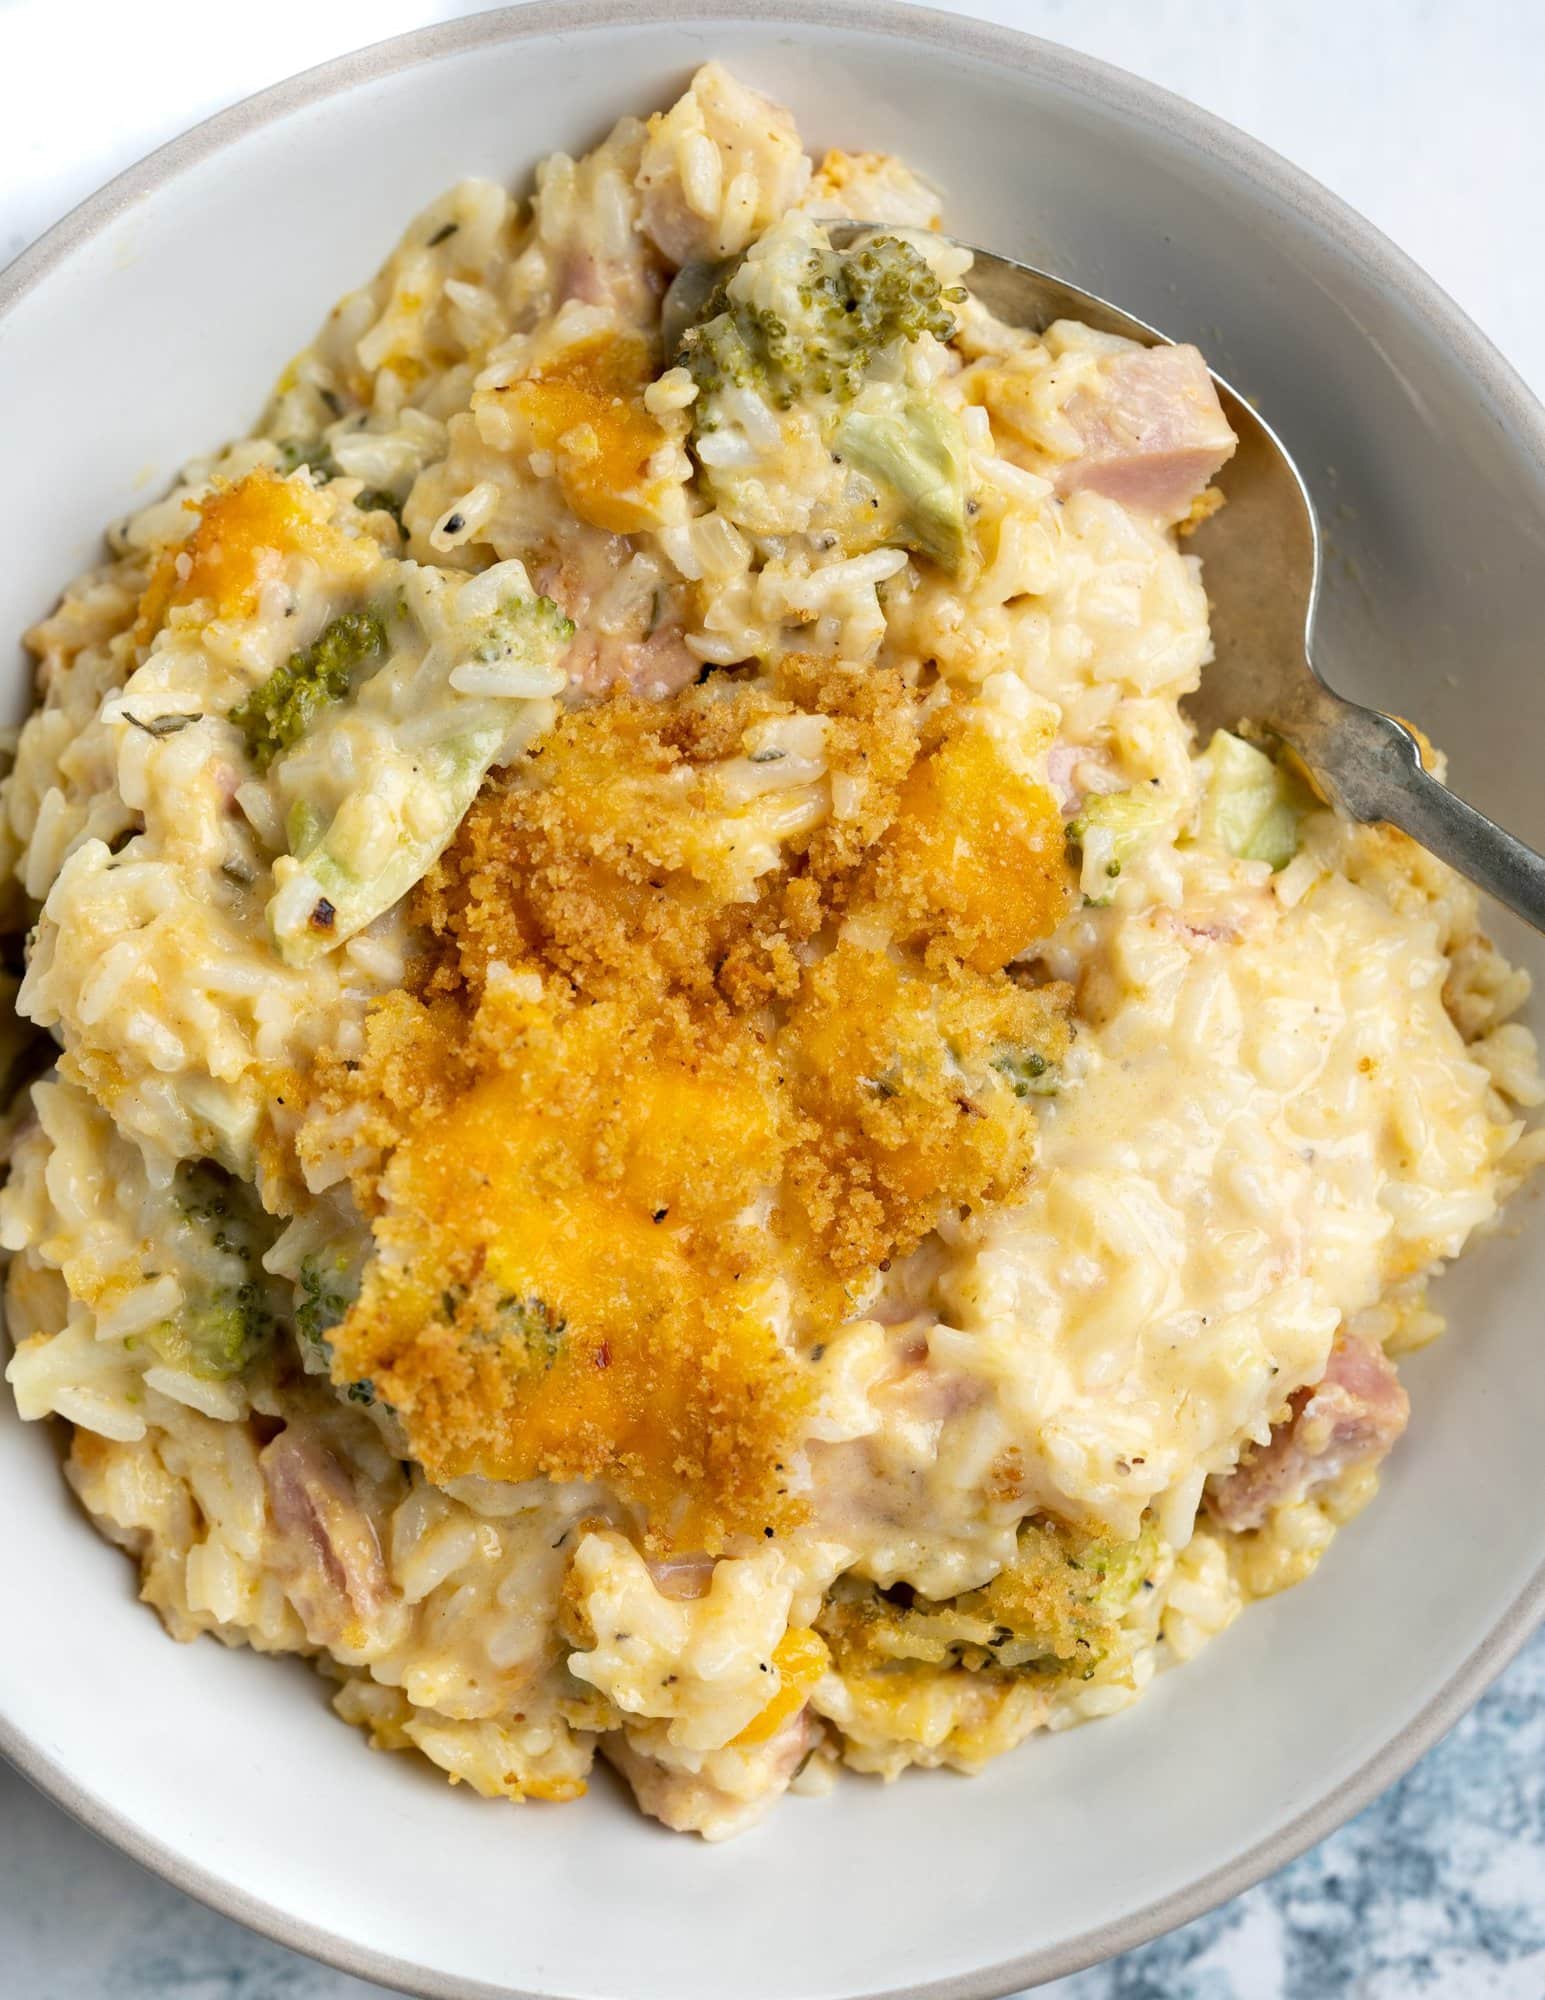 Ham casserole made with leftover ham, rice, broccoli and creamy sauce and a golden brown crusty top served in a white bowl and spoon.